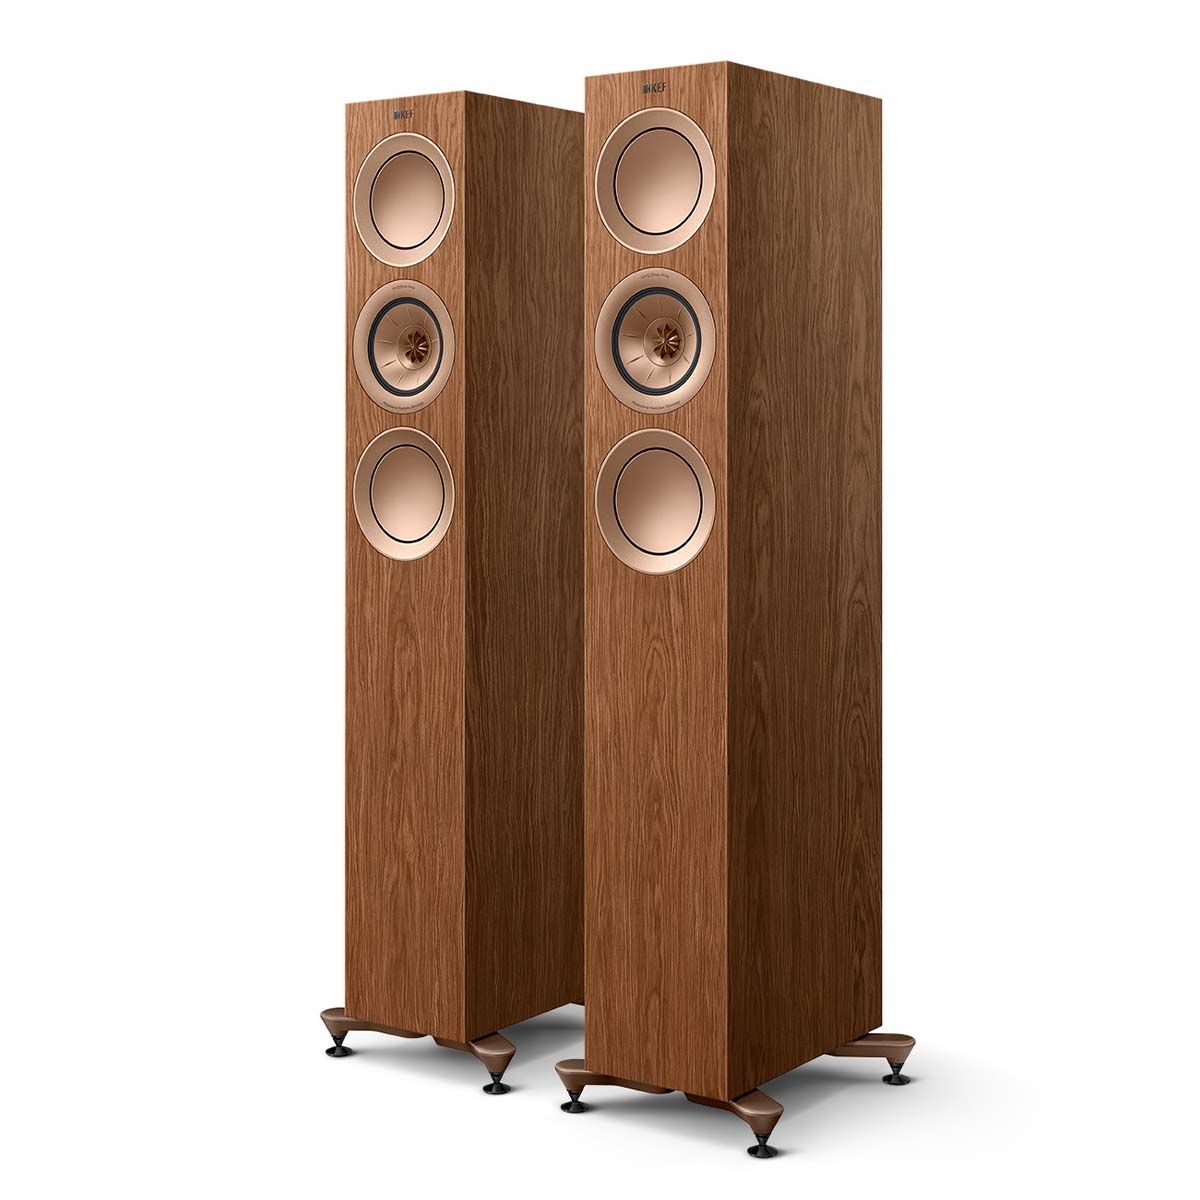 KEF R5 Meta Tower Speaker - Each walnut angled front view of pair without grilles